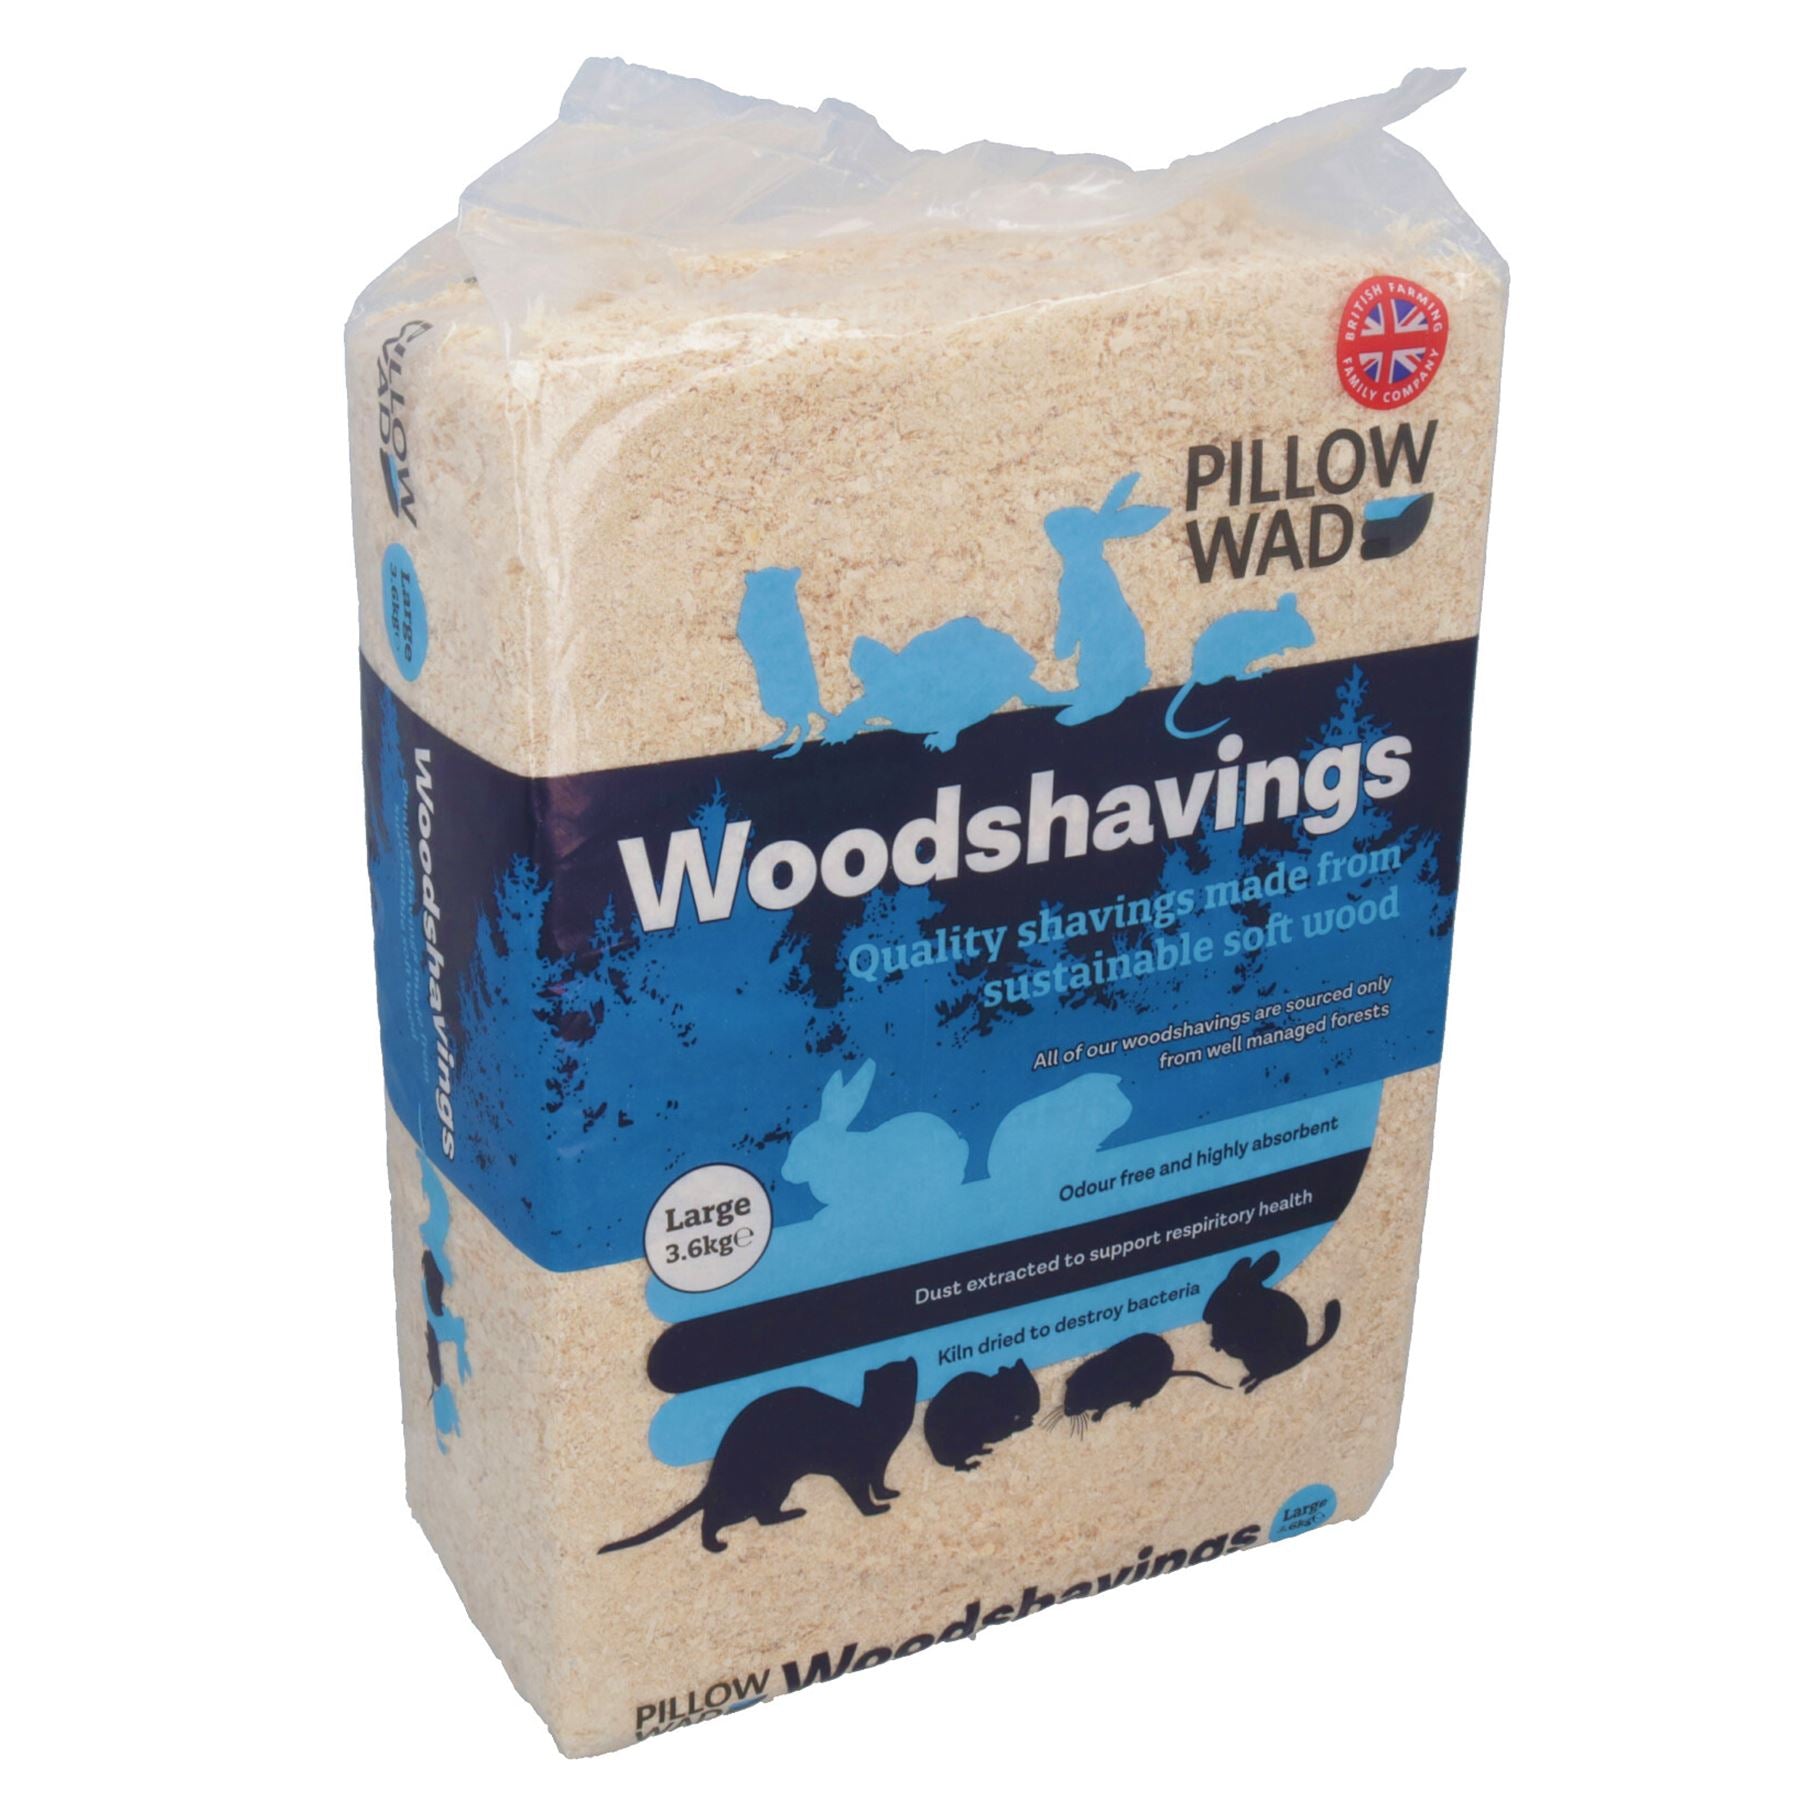 Superior Quality Dust Extracted Kiln Dried Small Animal Bedding Woodshaving 3.6Kg